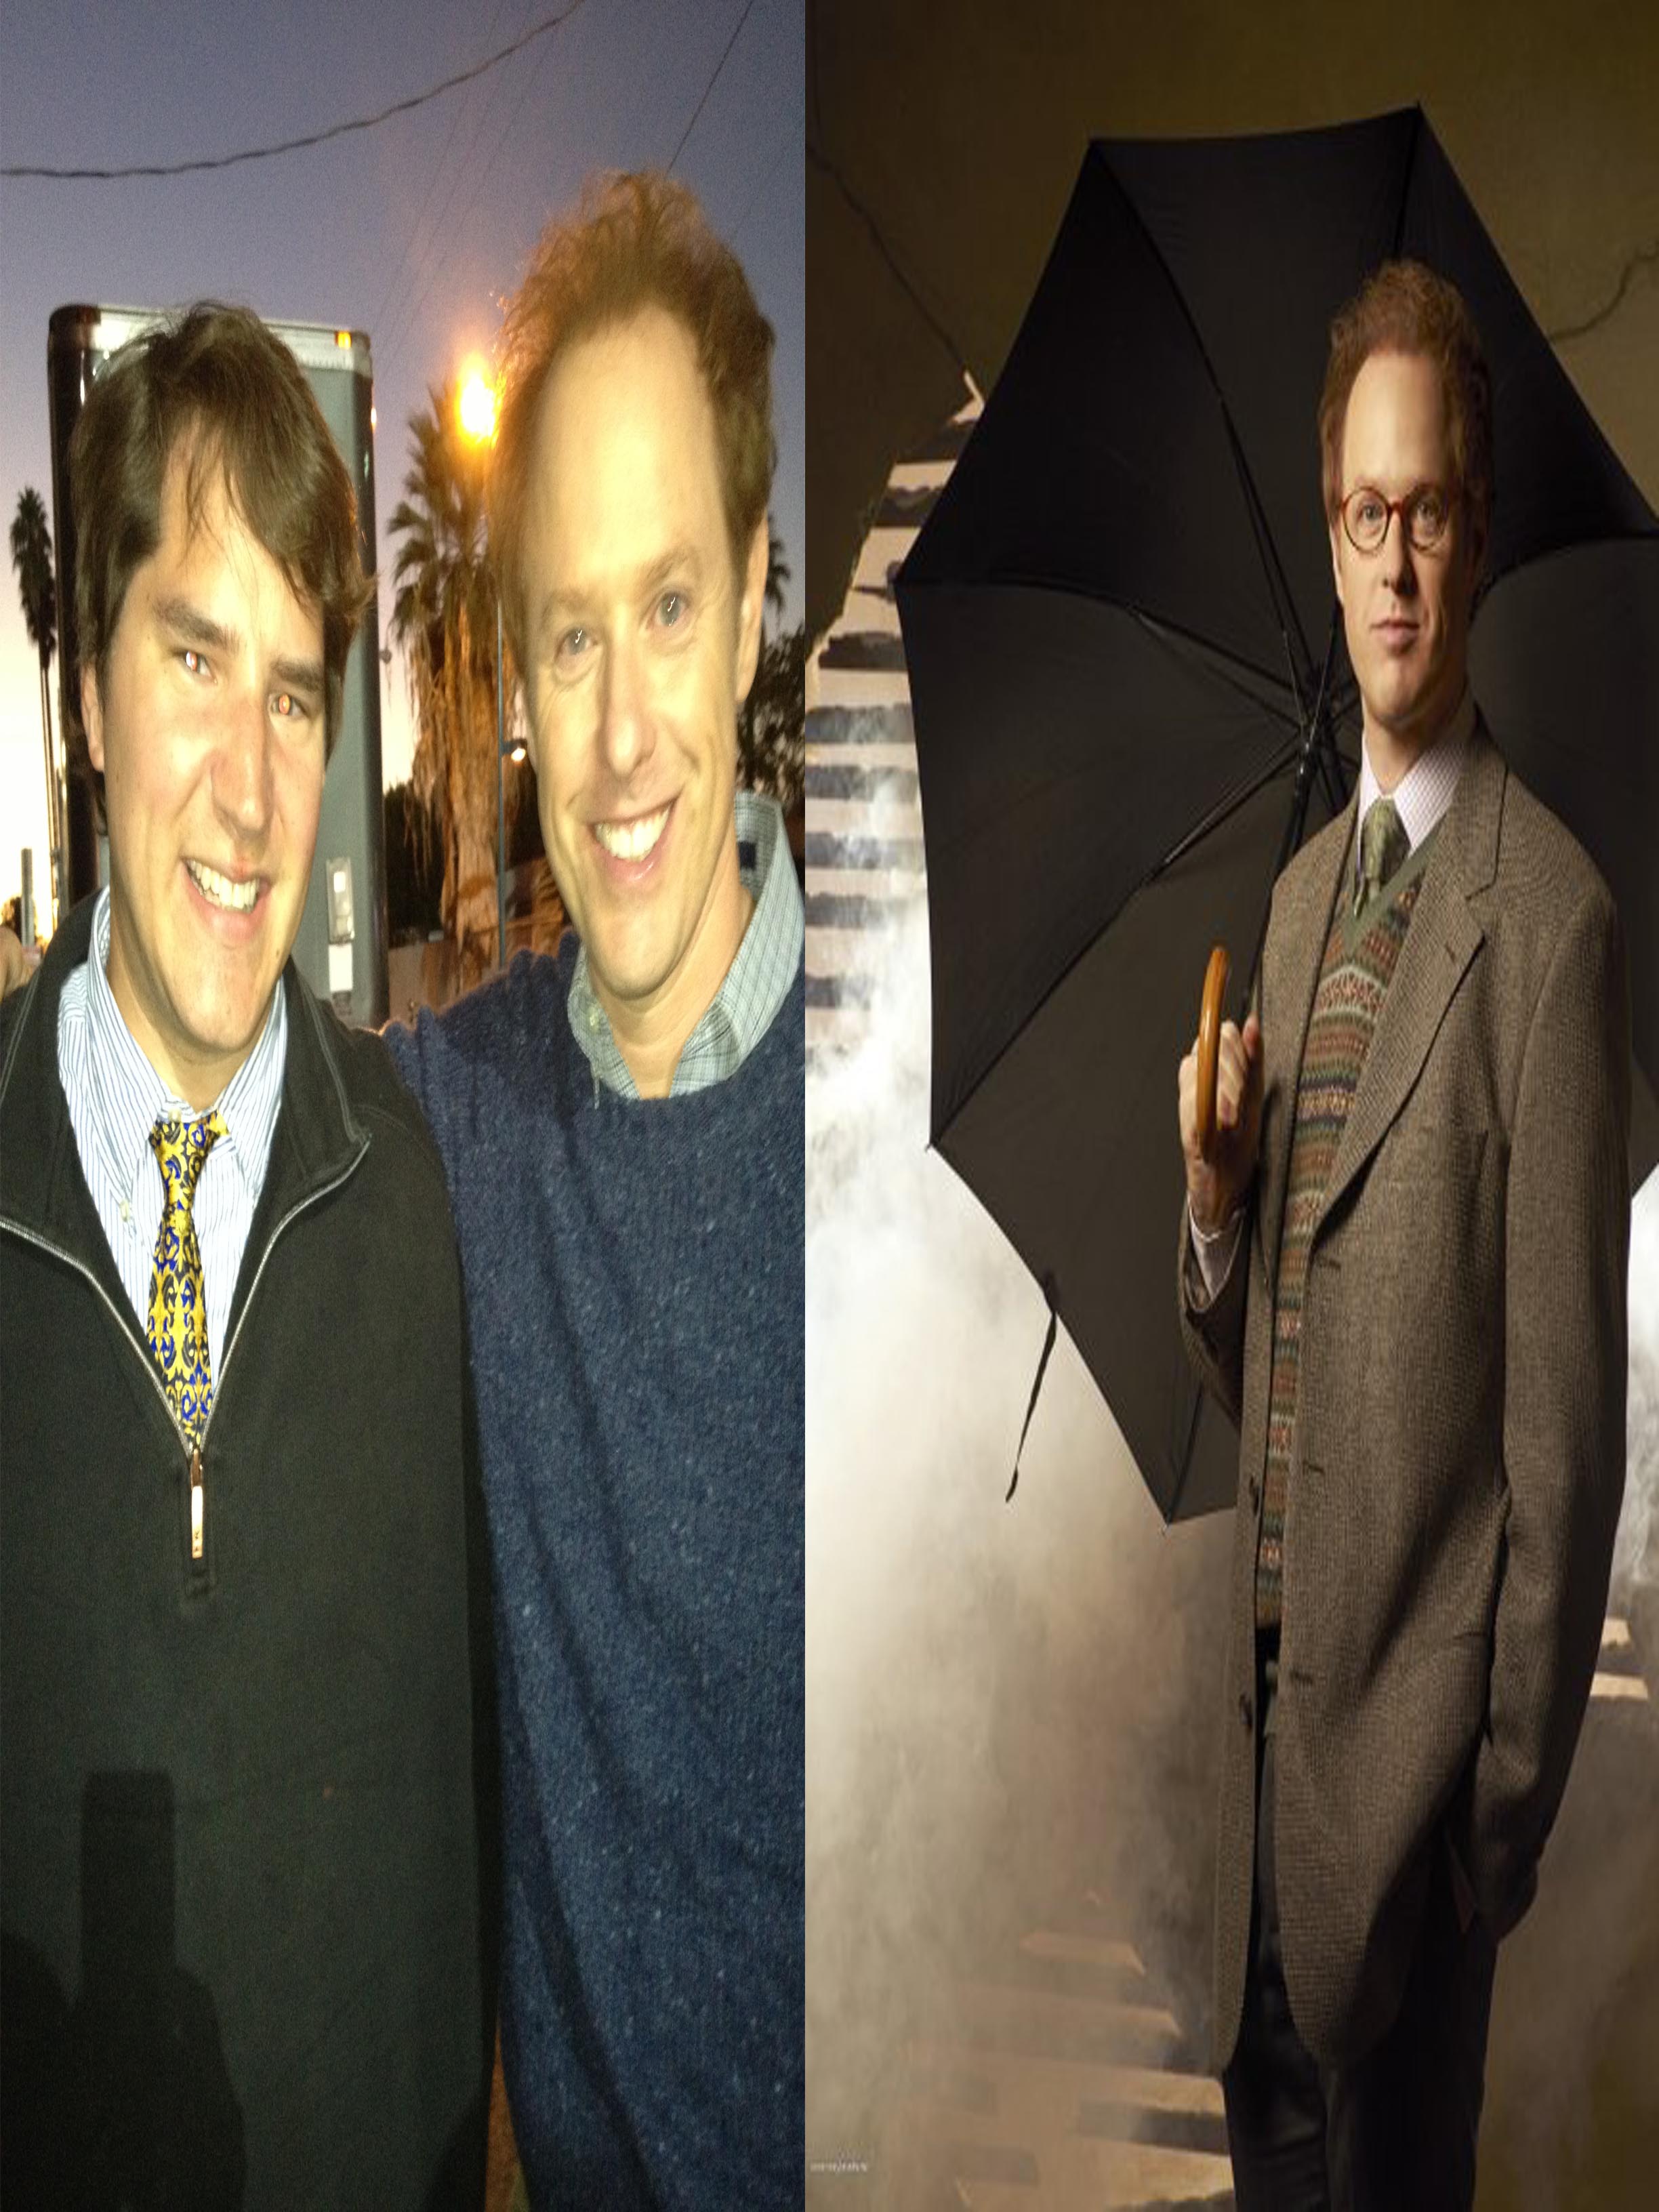 Raphael Sbarge (Once Upon A Time) and I on set of 